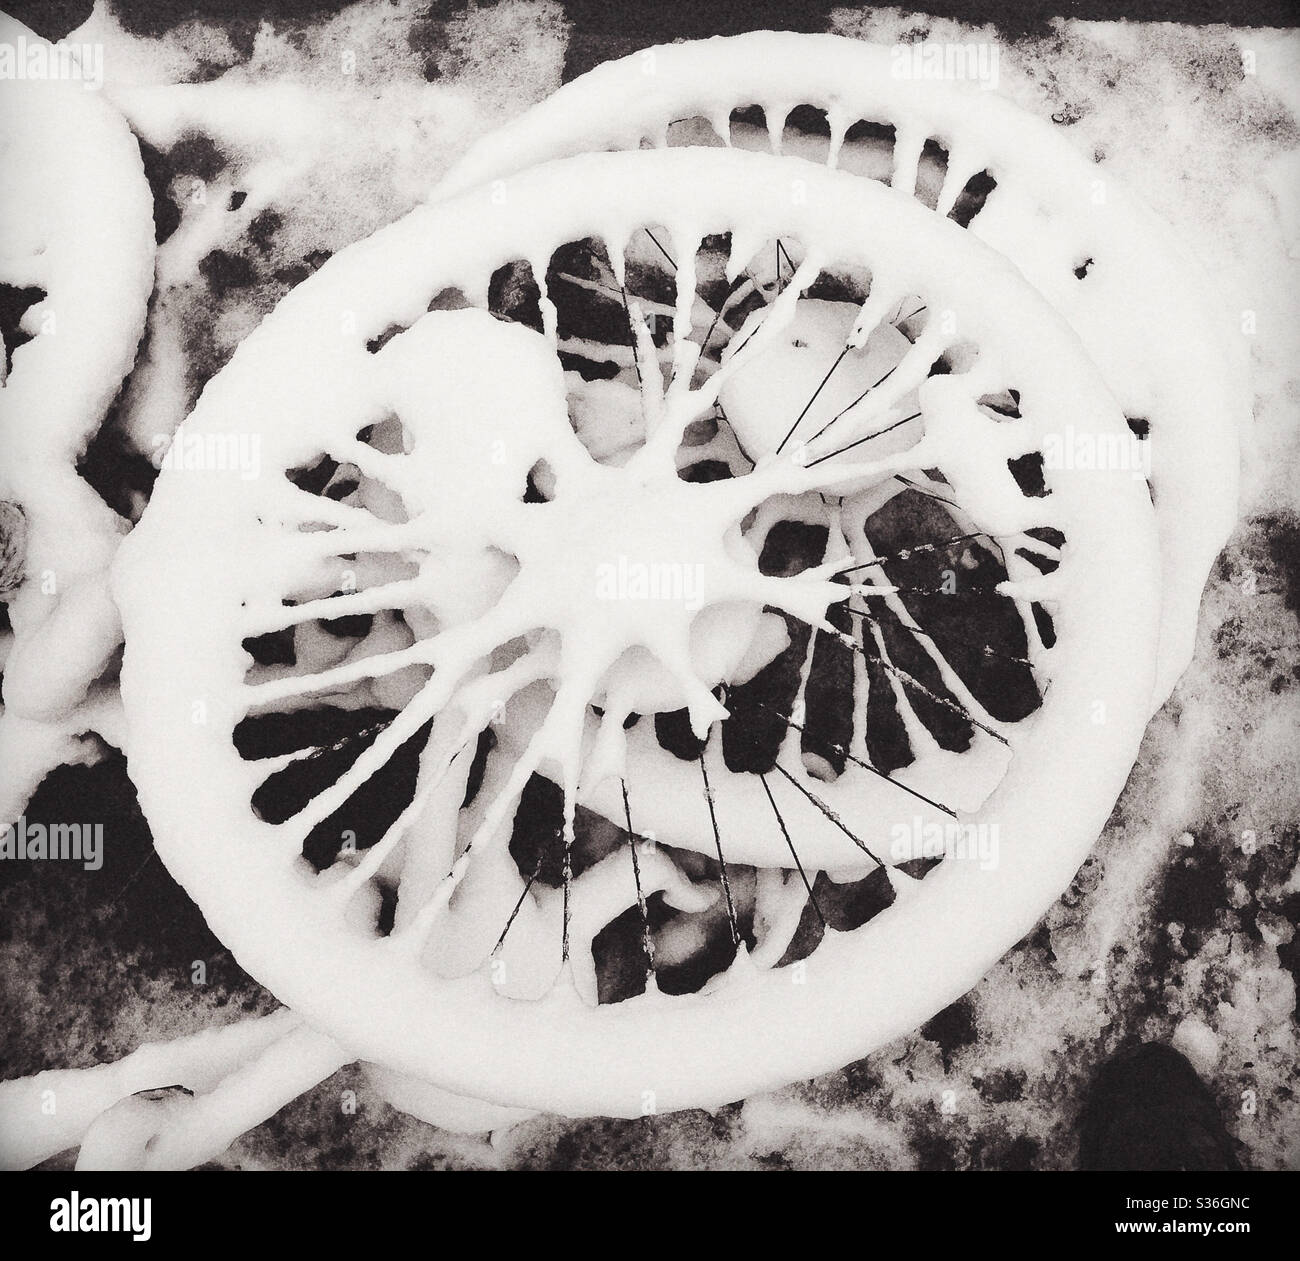 Snow Covered Bicycle Wheels on the Ground Stock Photo